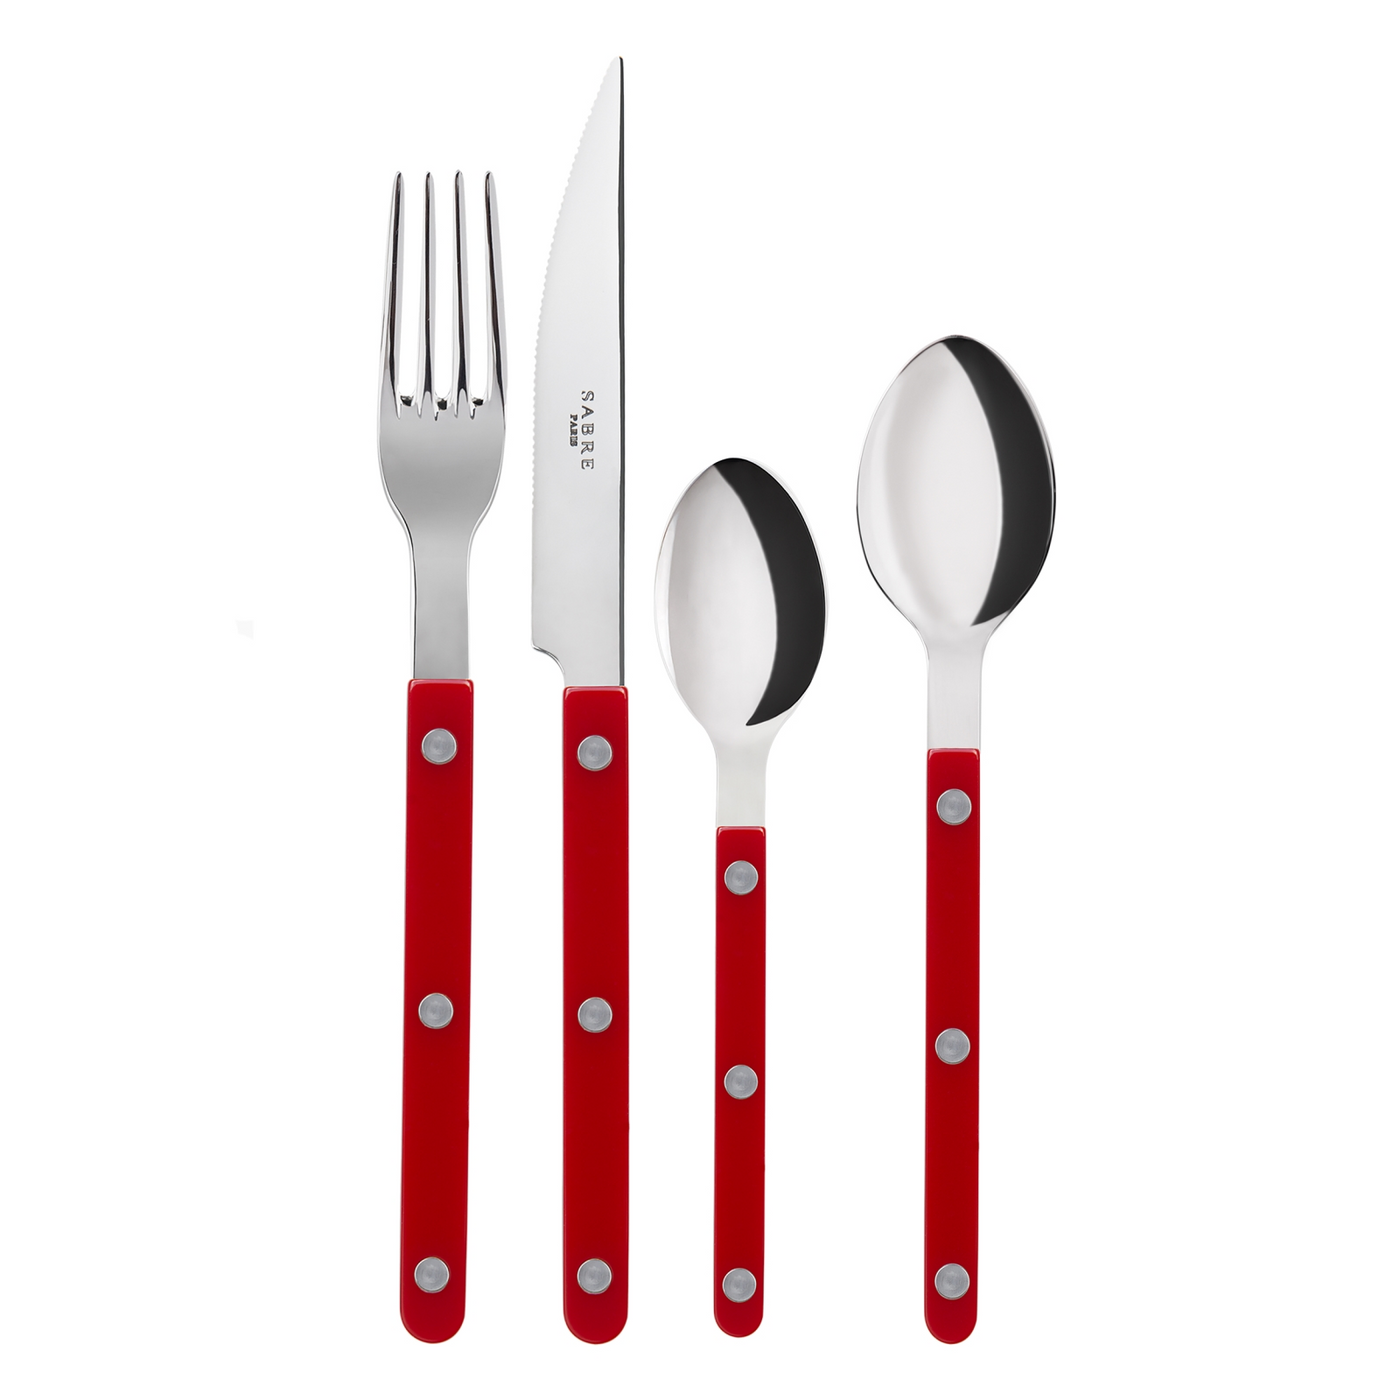 Bistrot shiny solid 4 pieces set - Red